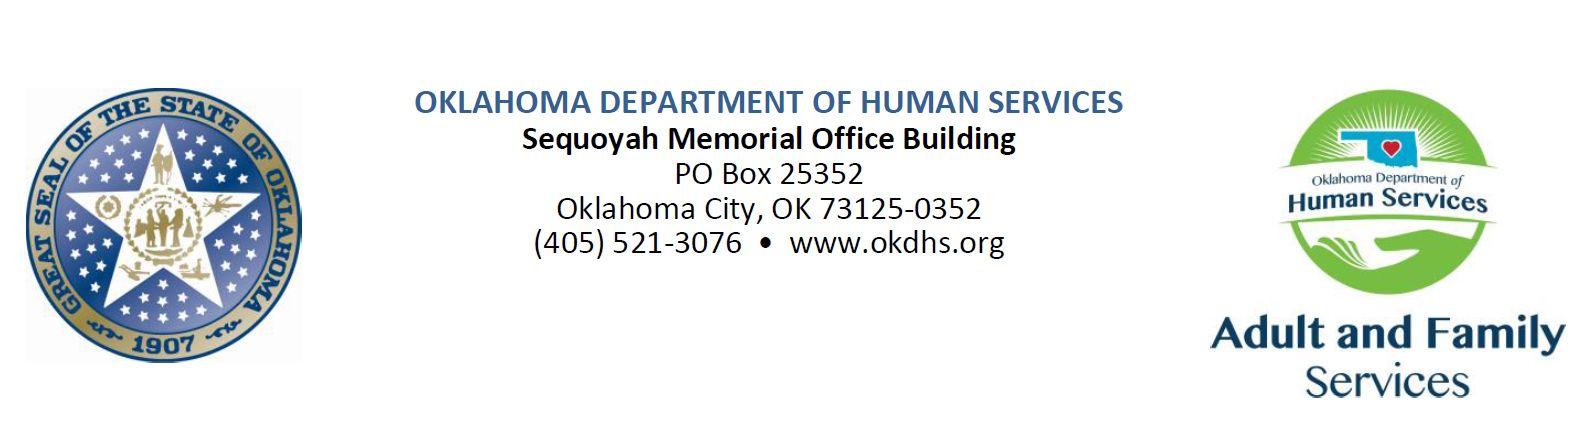 OKDHS Logo - Co Payments And Cost Sharing